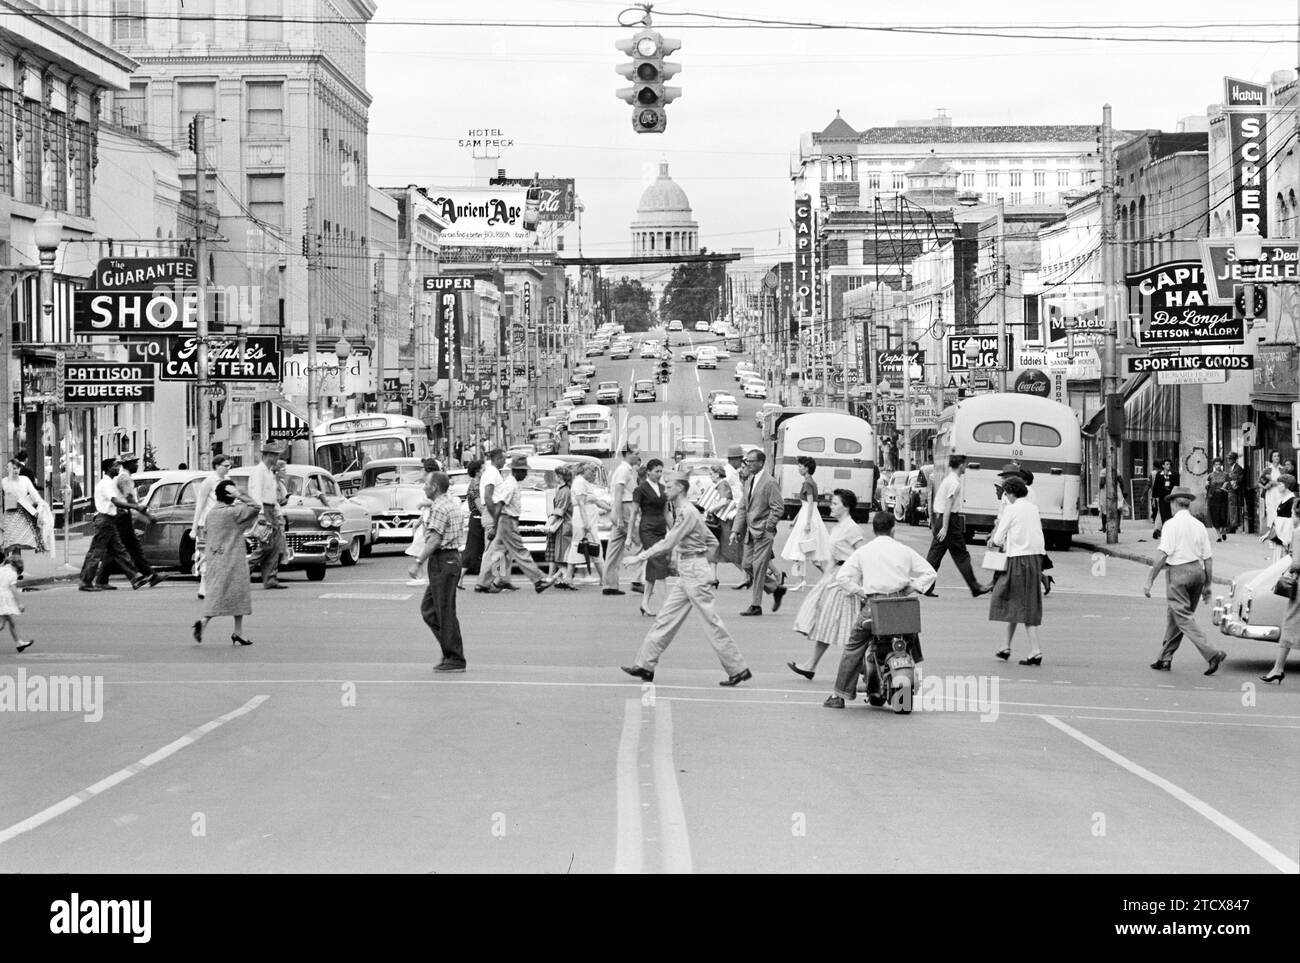 Downtown street scene at the time of the closing of high schools to prevent integration, Little Rock, Arkansas, USA, Thomas J. O'Halloran, U.S. News & World Report Magazine Photograph Collection, September 17, 1958 Stock Photo